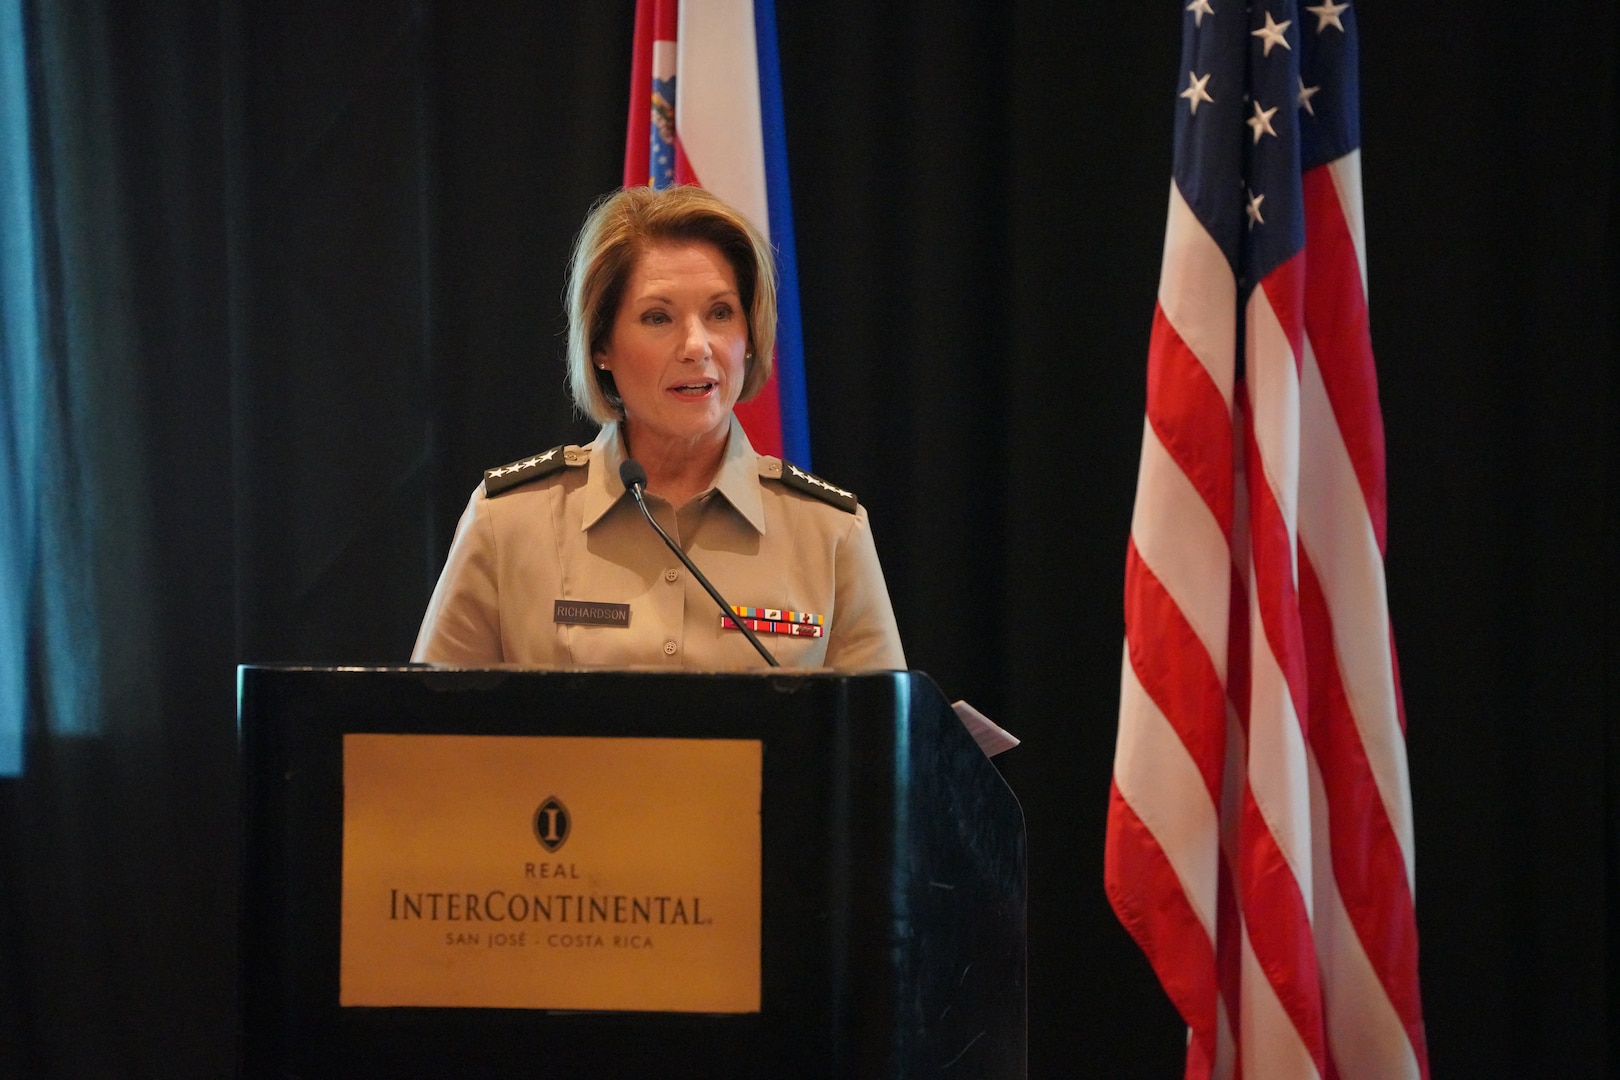 U.S. Army Gen. Laura Richardson, the commander of U.S. Southern Command, gives opening remarks at the Central American Security Conference (CENTSEC) 2023.